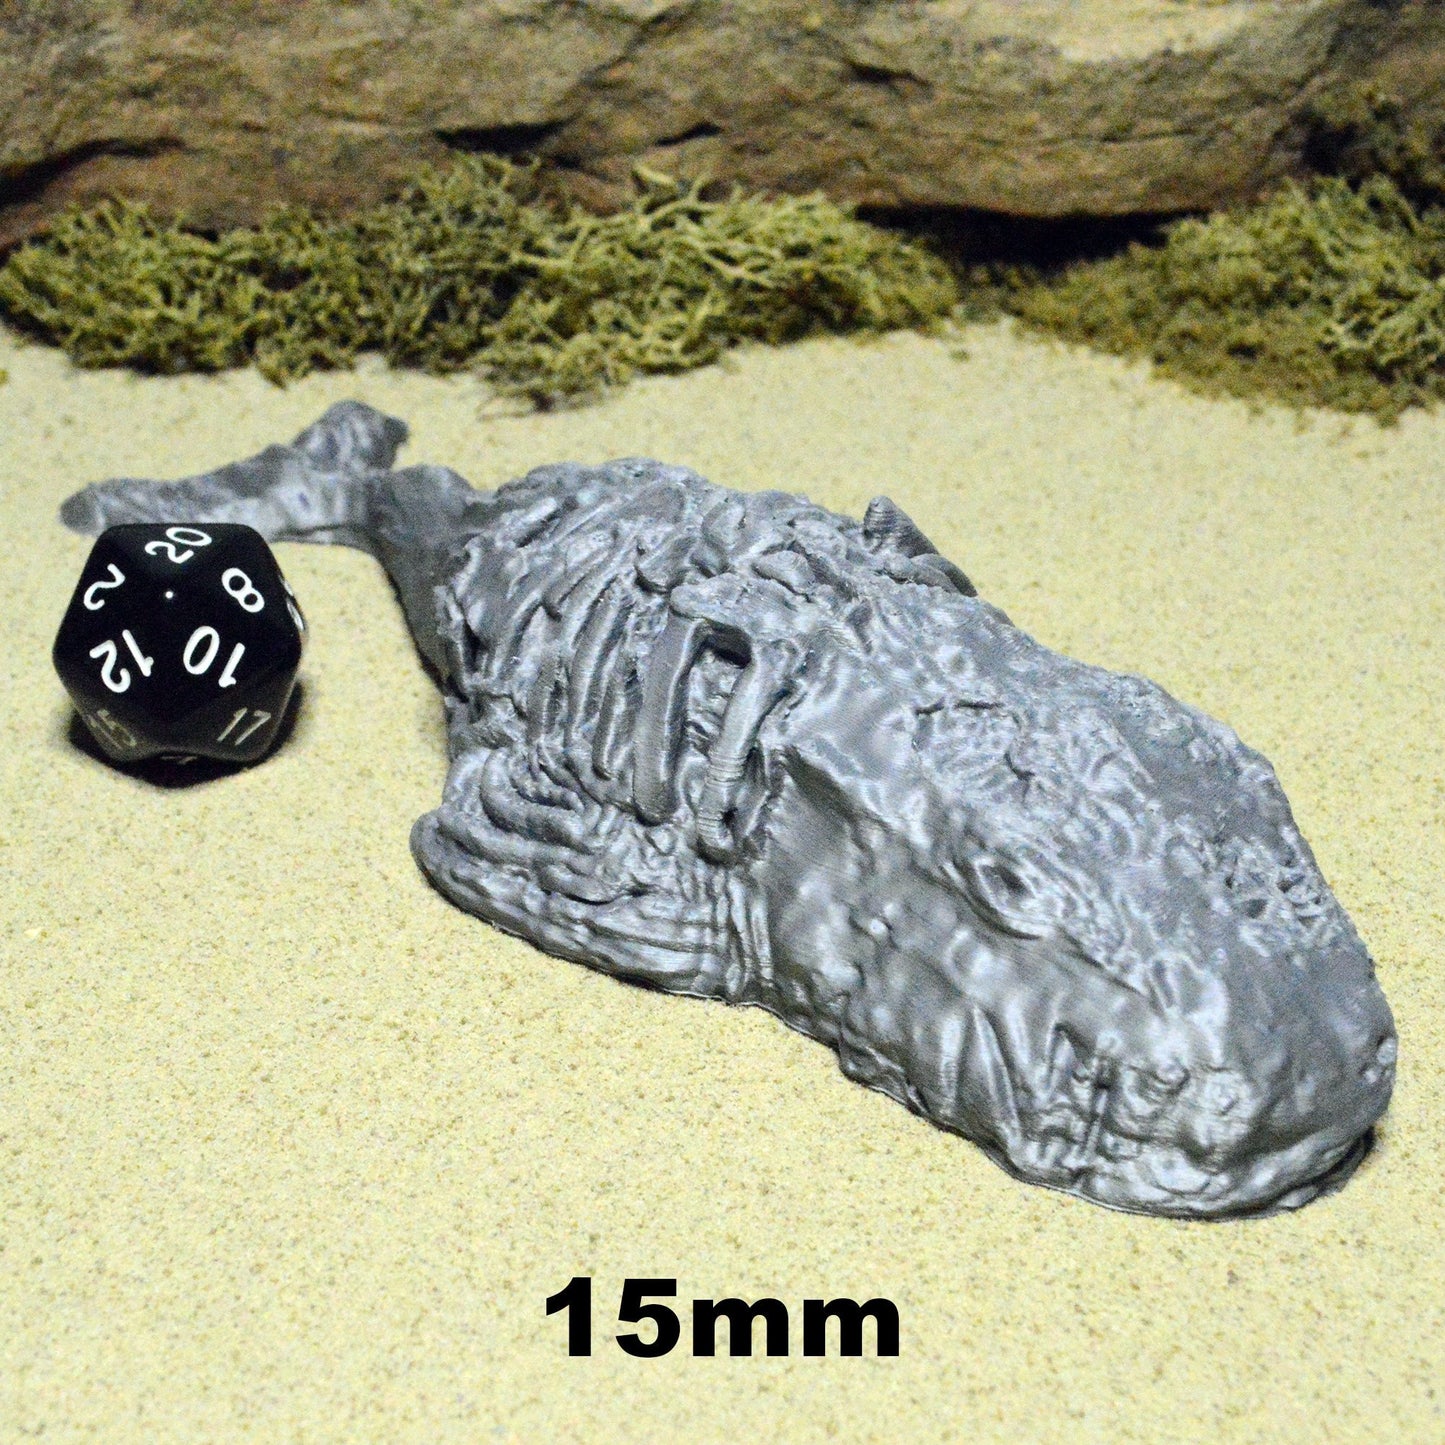 Dead Whale 15mm 28mm for D&D Terrain, DnD Pathfinder Coastal Pirate Whale Corpse, Depths of Savage Atoll